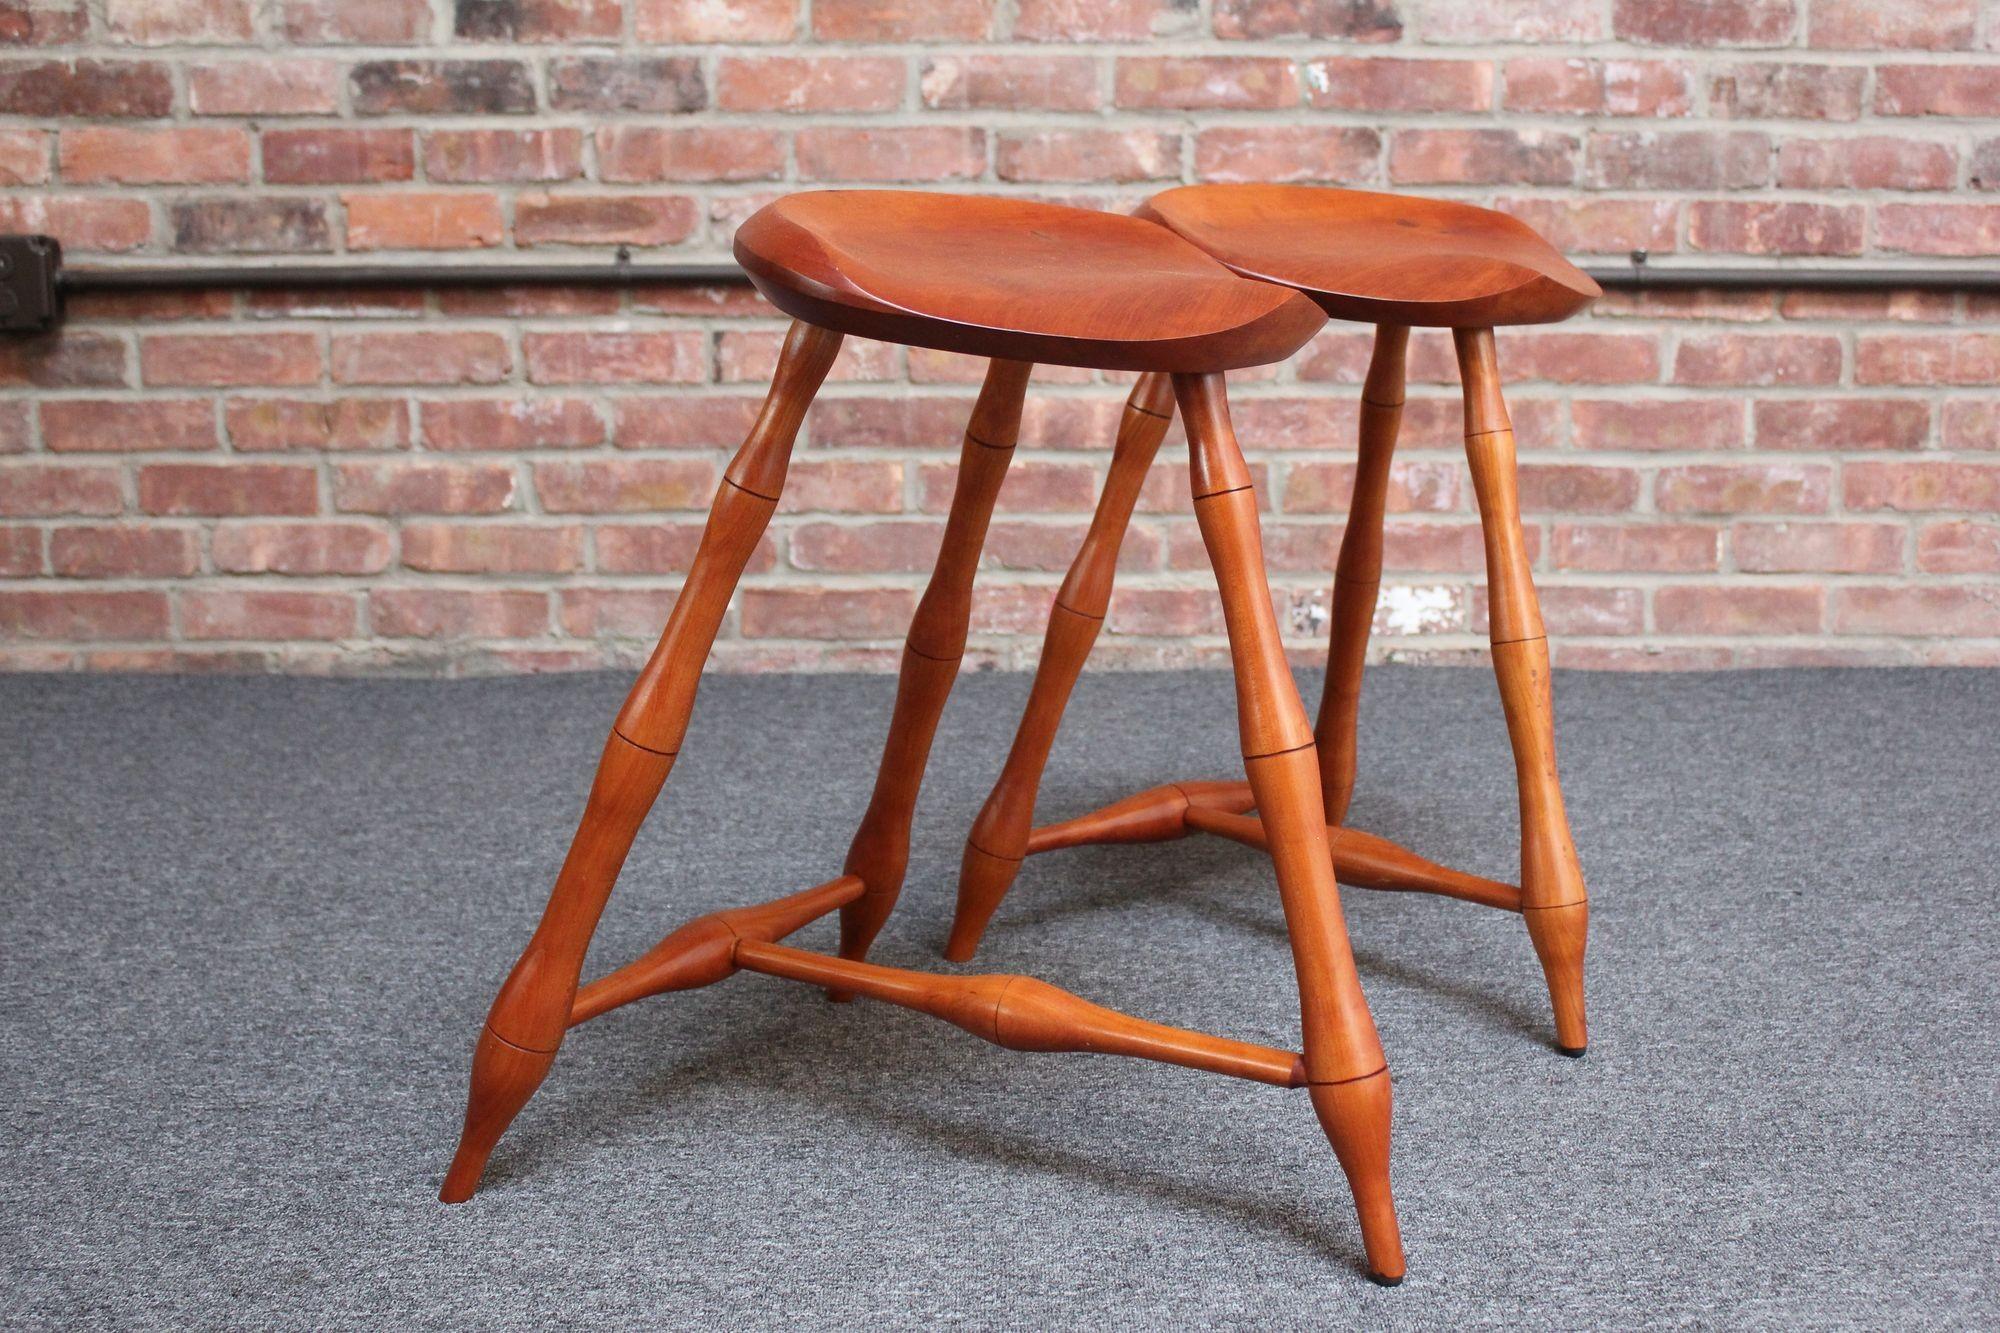 Pair of Vintage Studio Craft Windsor-Style Three Legged Low Stools in Cherrywood For Sale 9